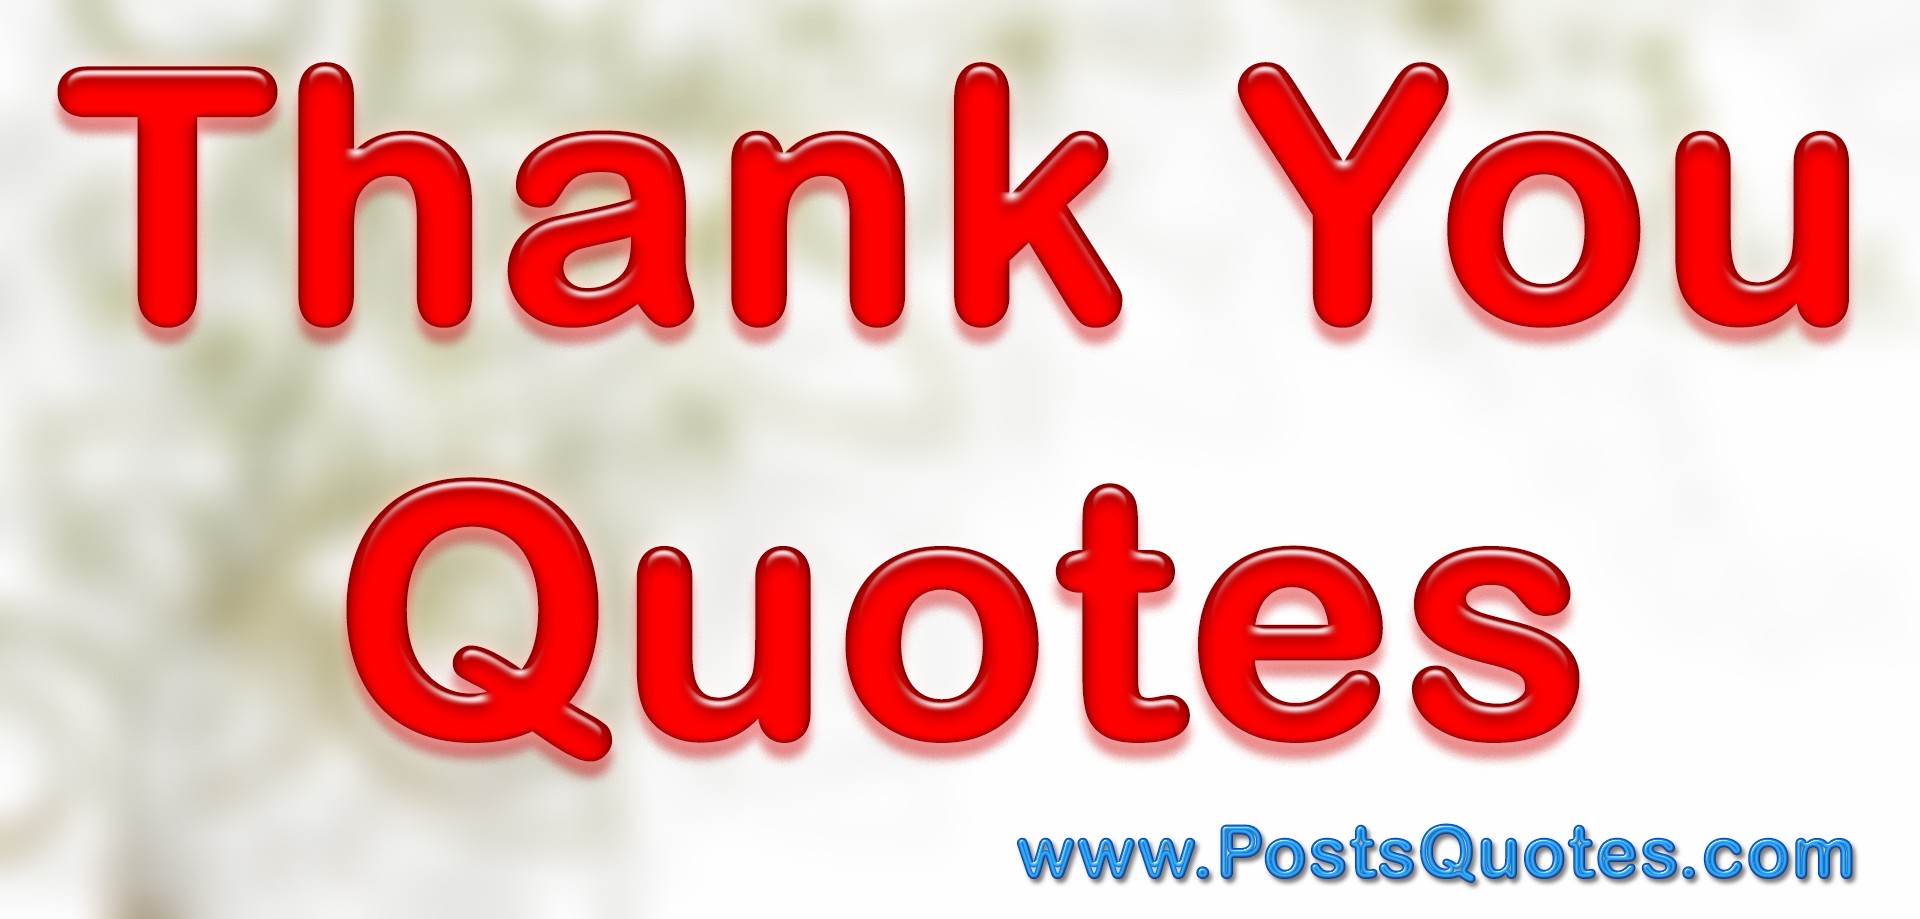 50 Thank You Quotes - Posts Quotes